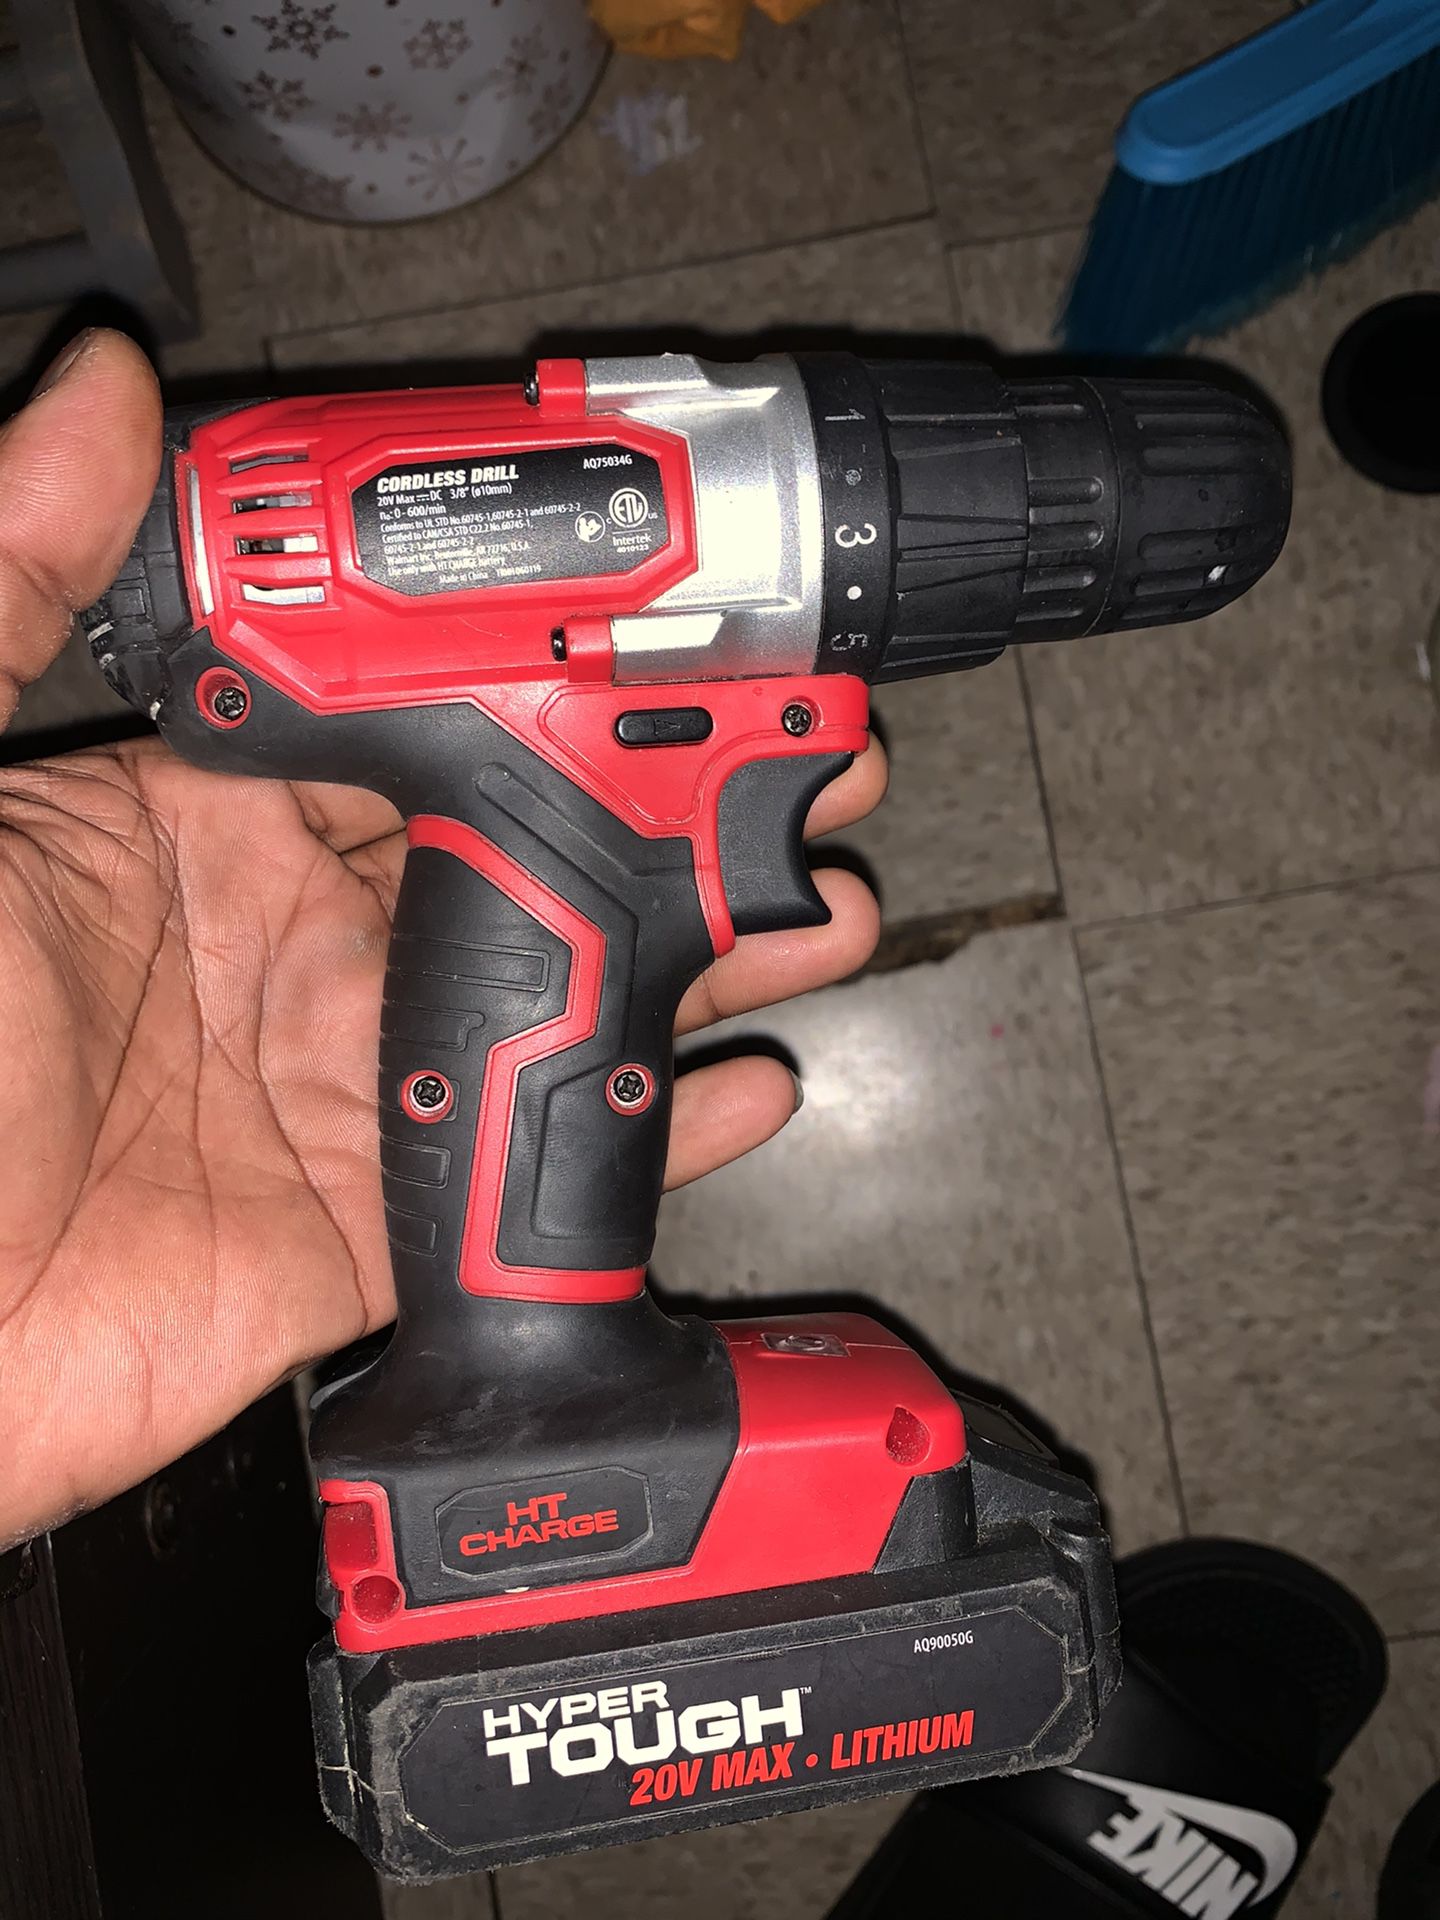 Wireless powered drill with battery no charger only 10$ at Walmart asking 40 firm its charged and you can test it